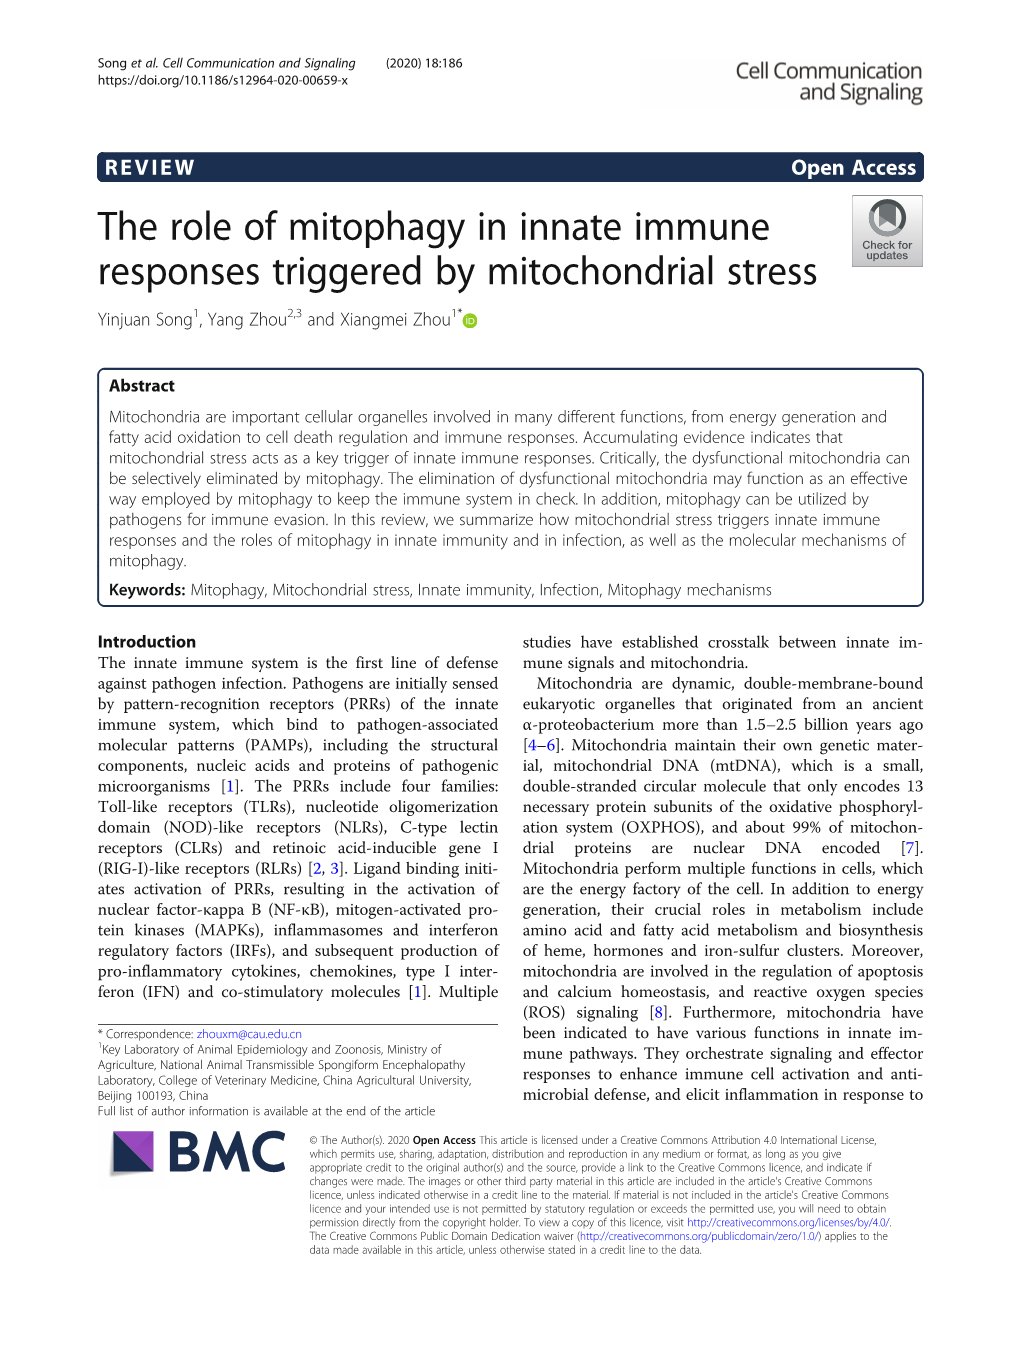 The Role of Mitophagy in Innate Immune Responses Triggered by Mitochondrial Stress Yinjuan Song1, Yang Zhou2,3 and Xiangmei Zhou1*